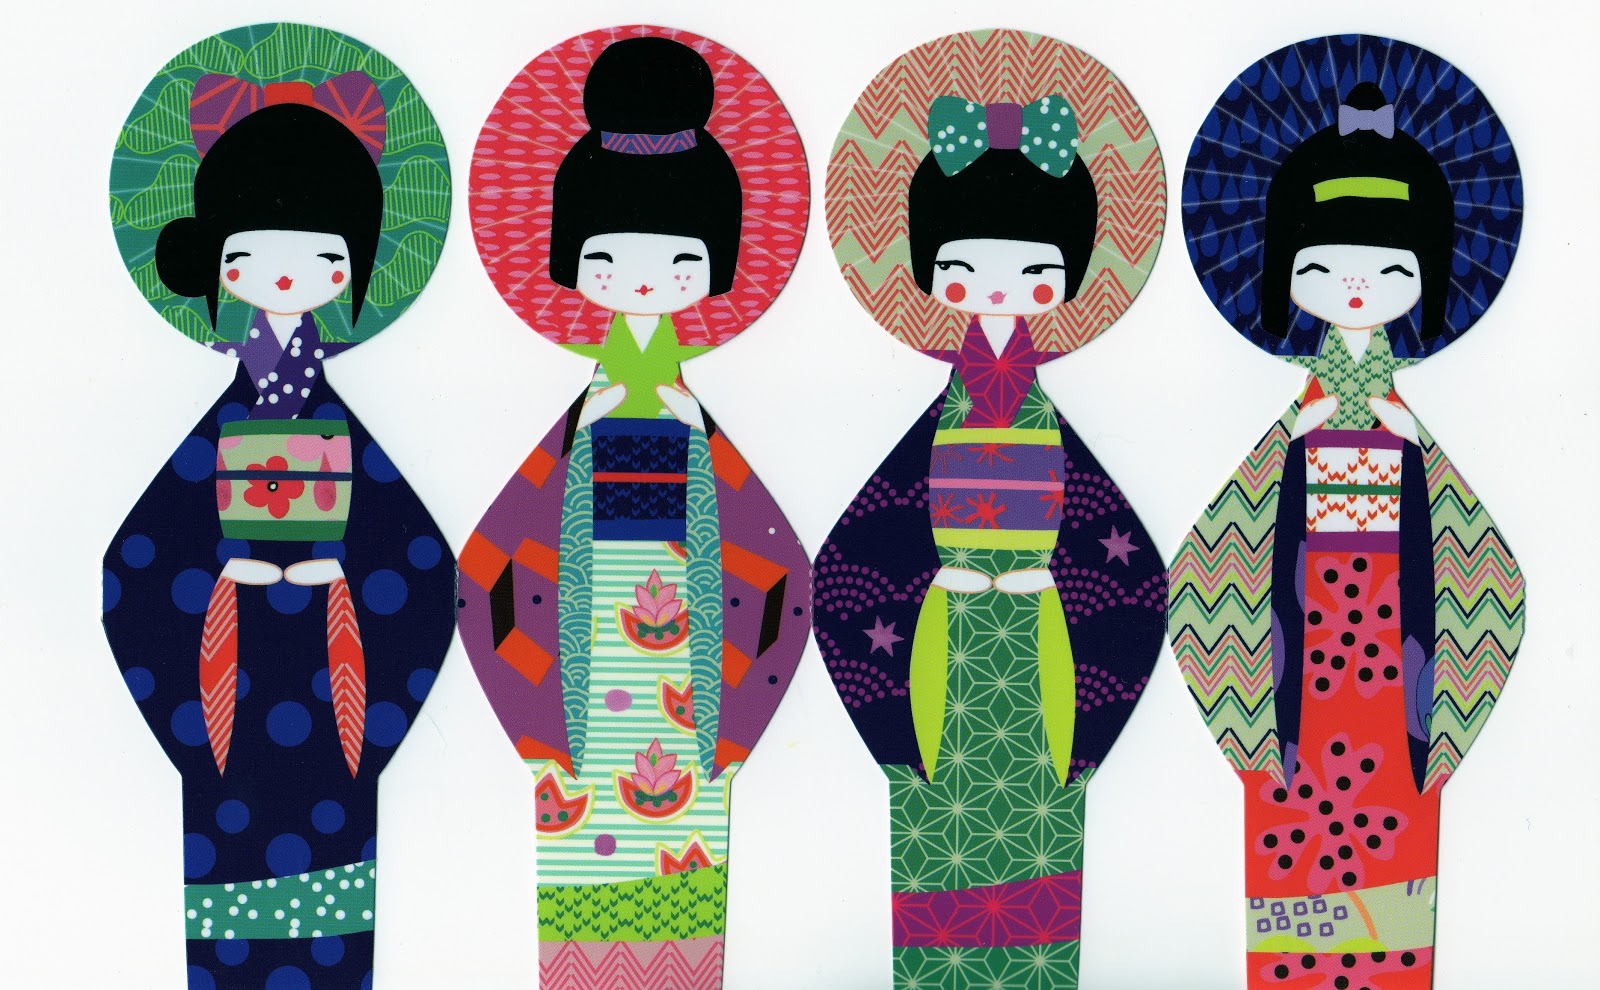 Modern Geishas in Japan — Pretty Tradition or Outdated 